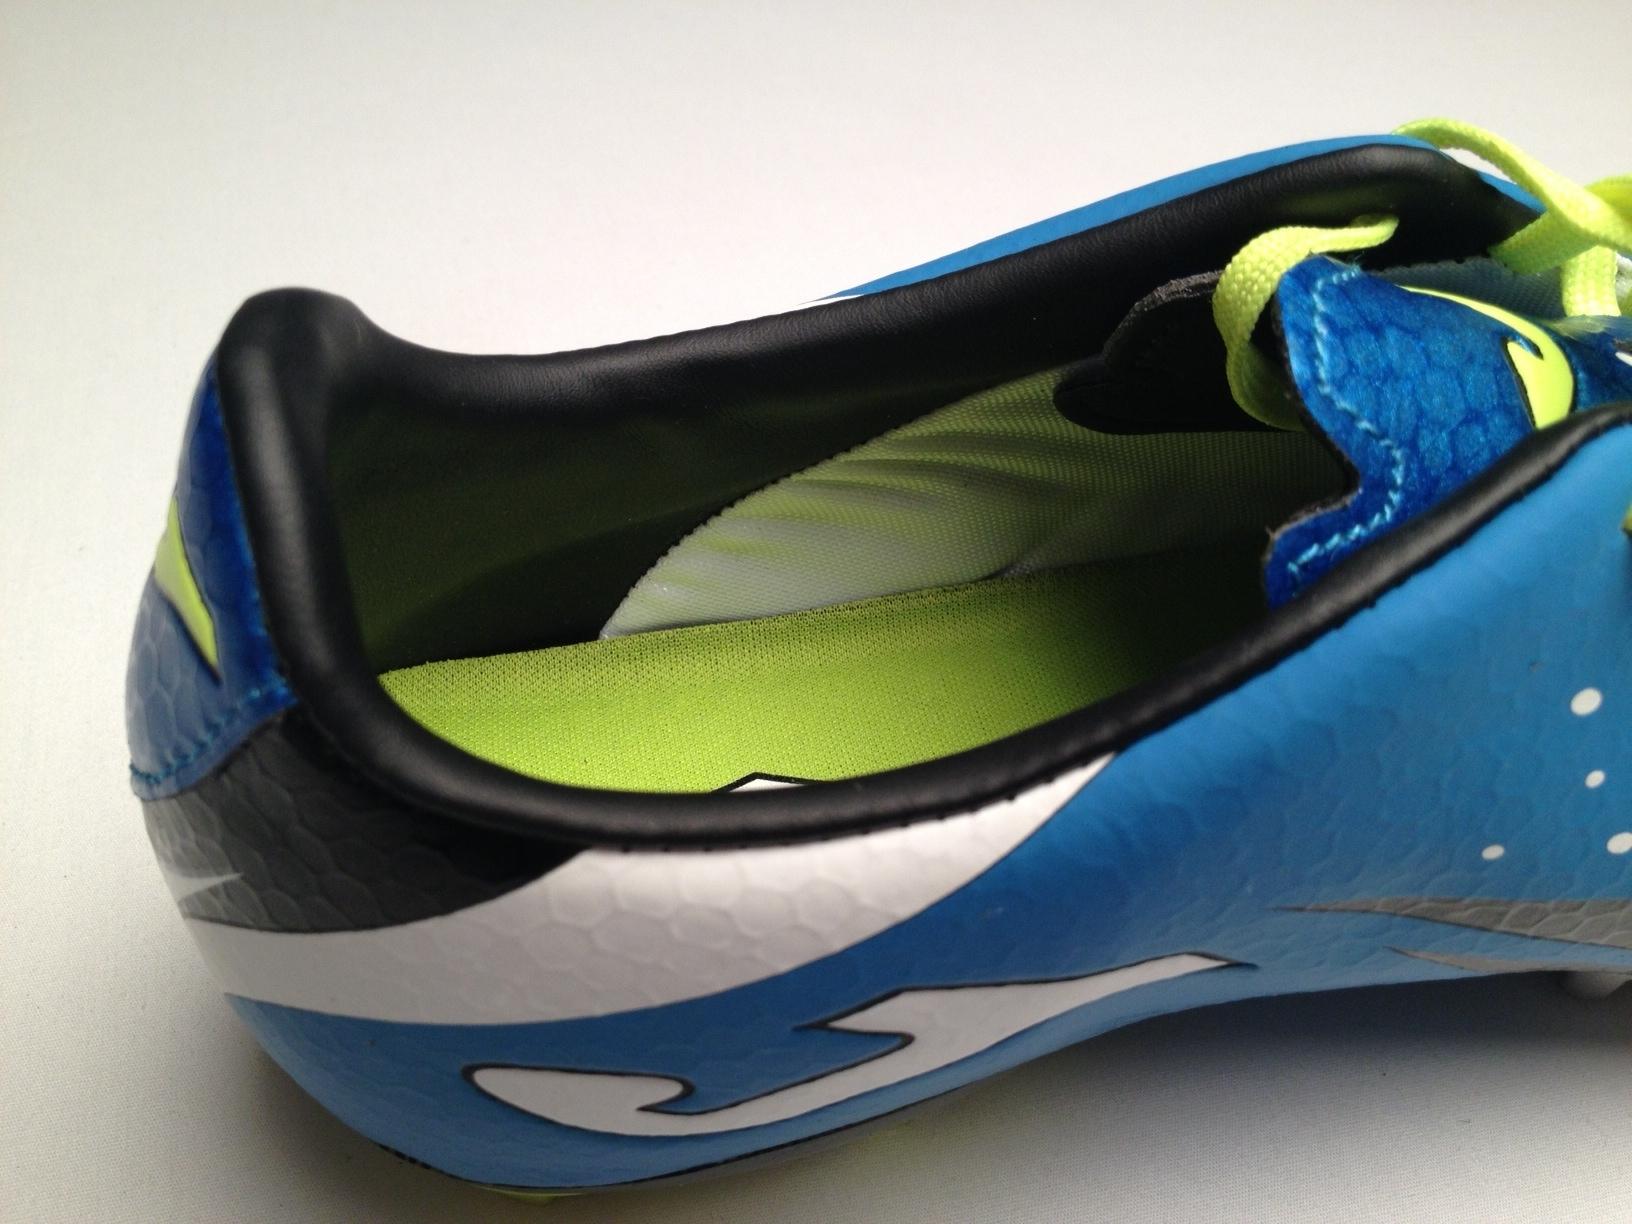 Joma Copa expert review